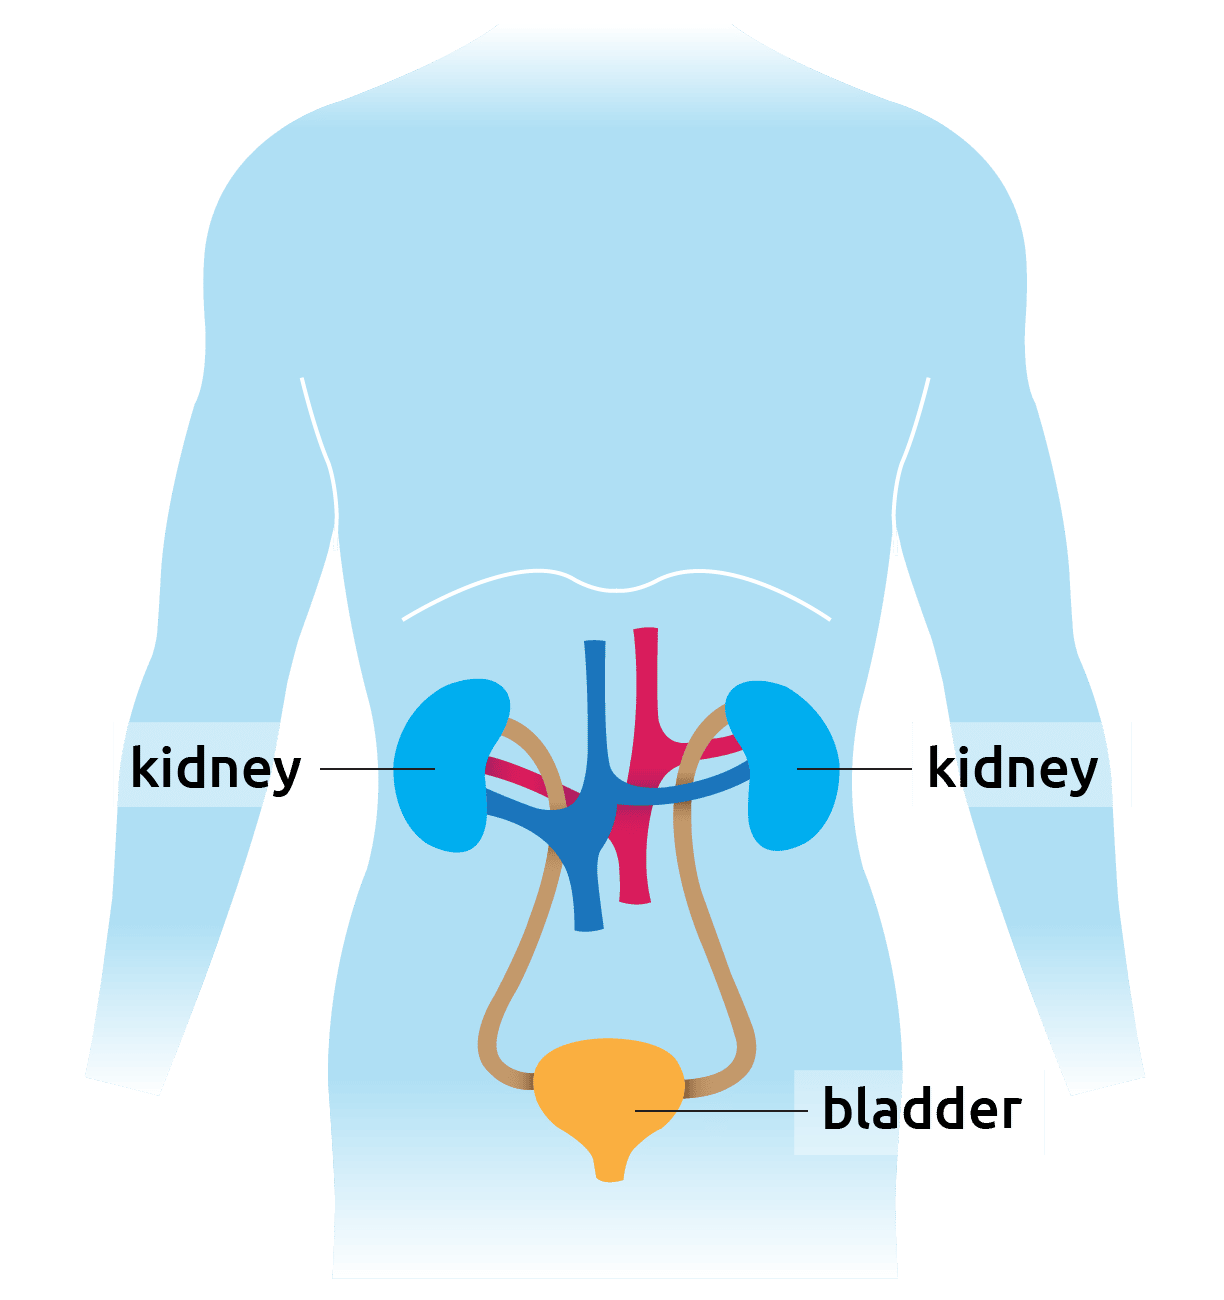 What are kidneys?